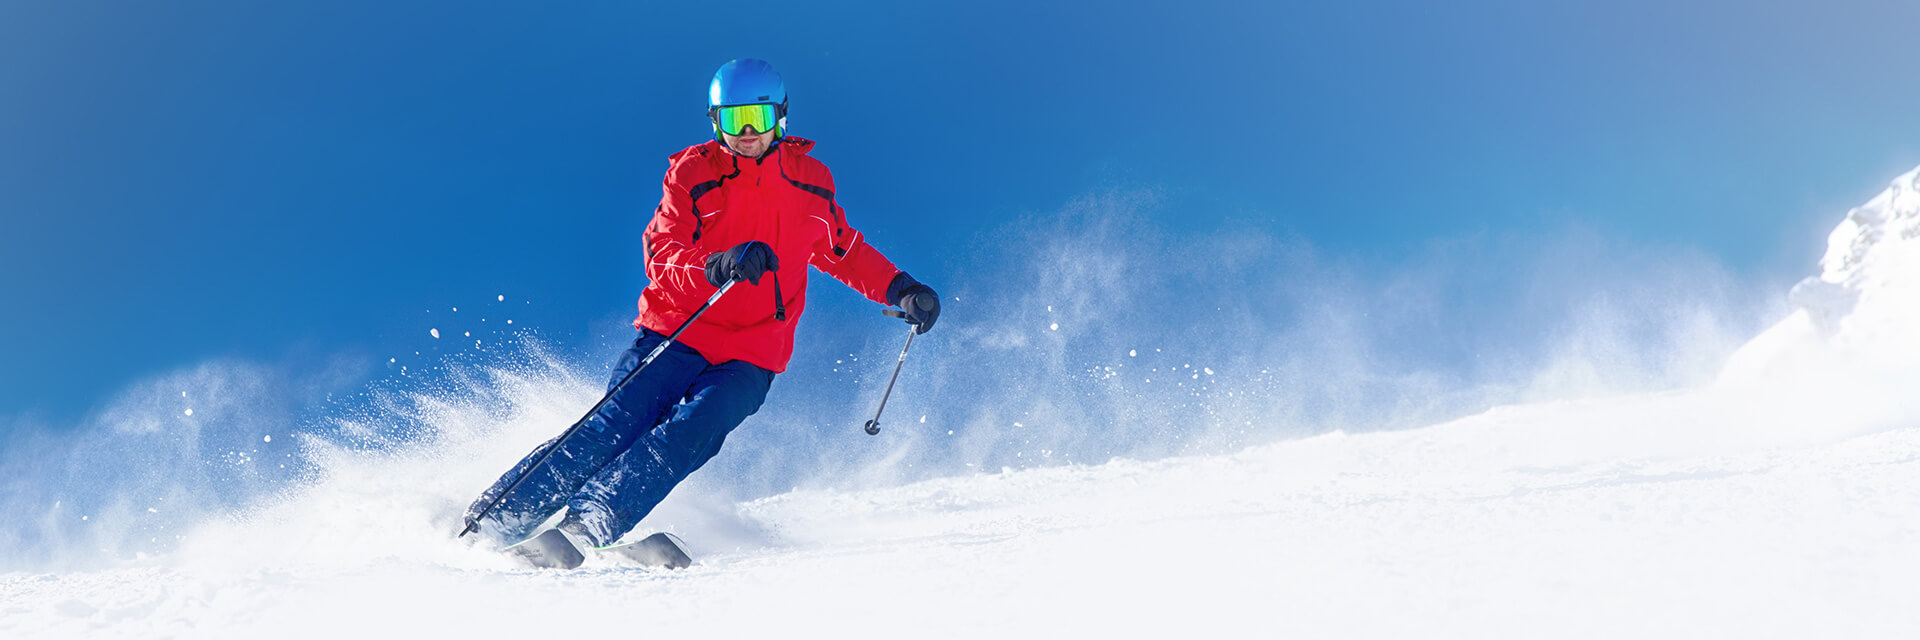 Explore Winter Sports: Angel Fire Skiing and Snowboarding